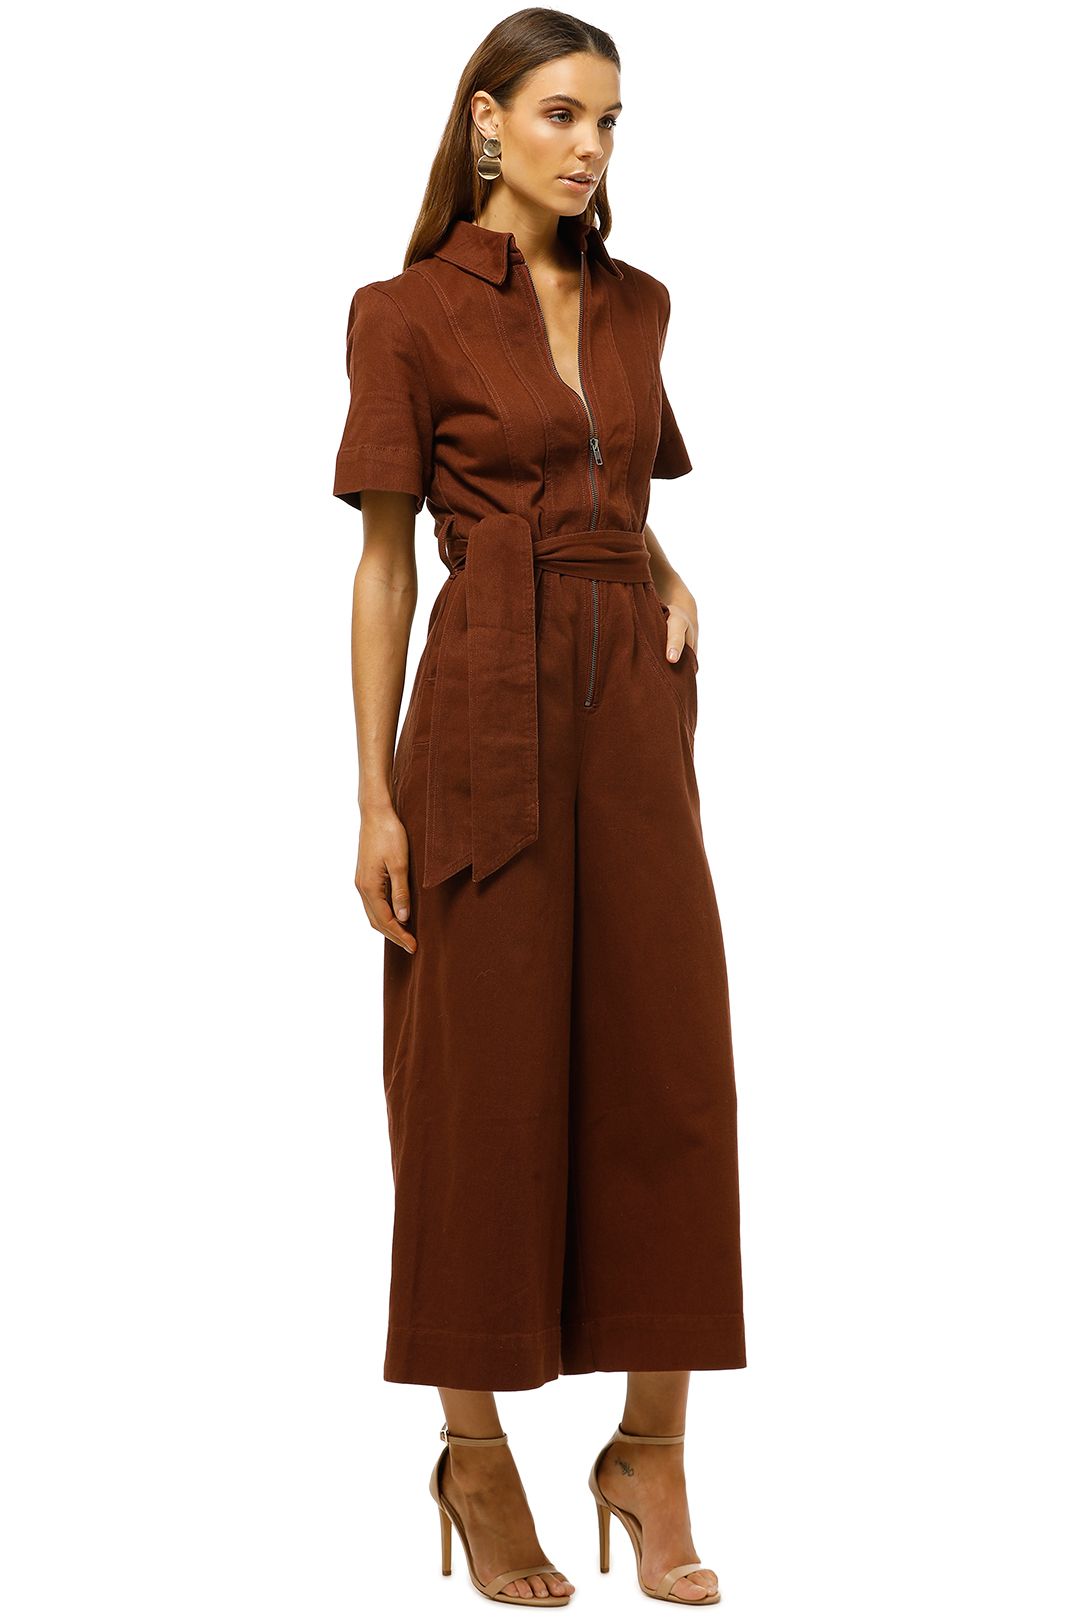 CMEO-Collective-Regardless-Jumpsuit-Mahogany-Side